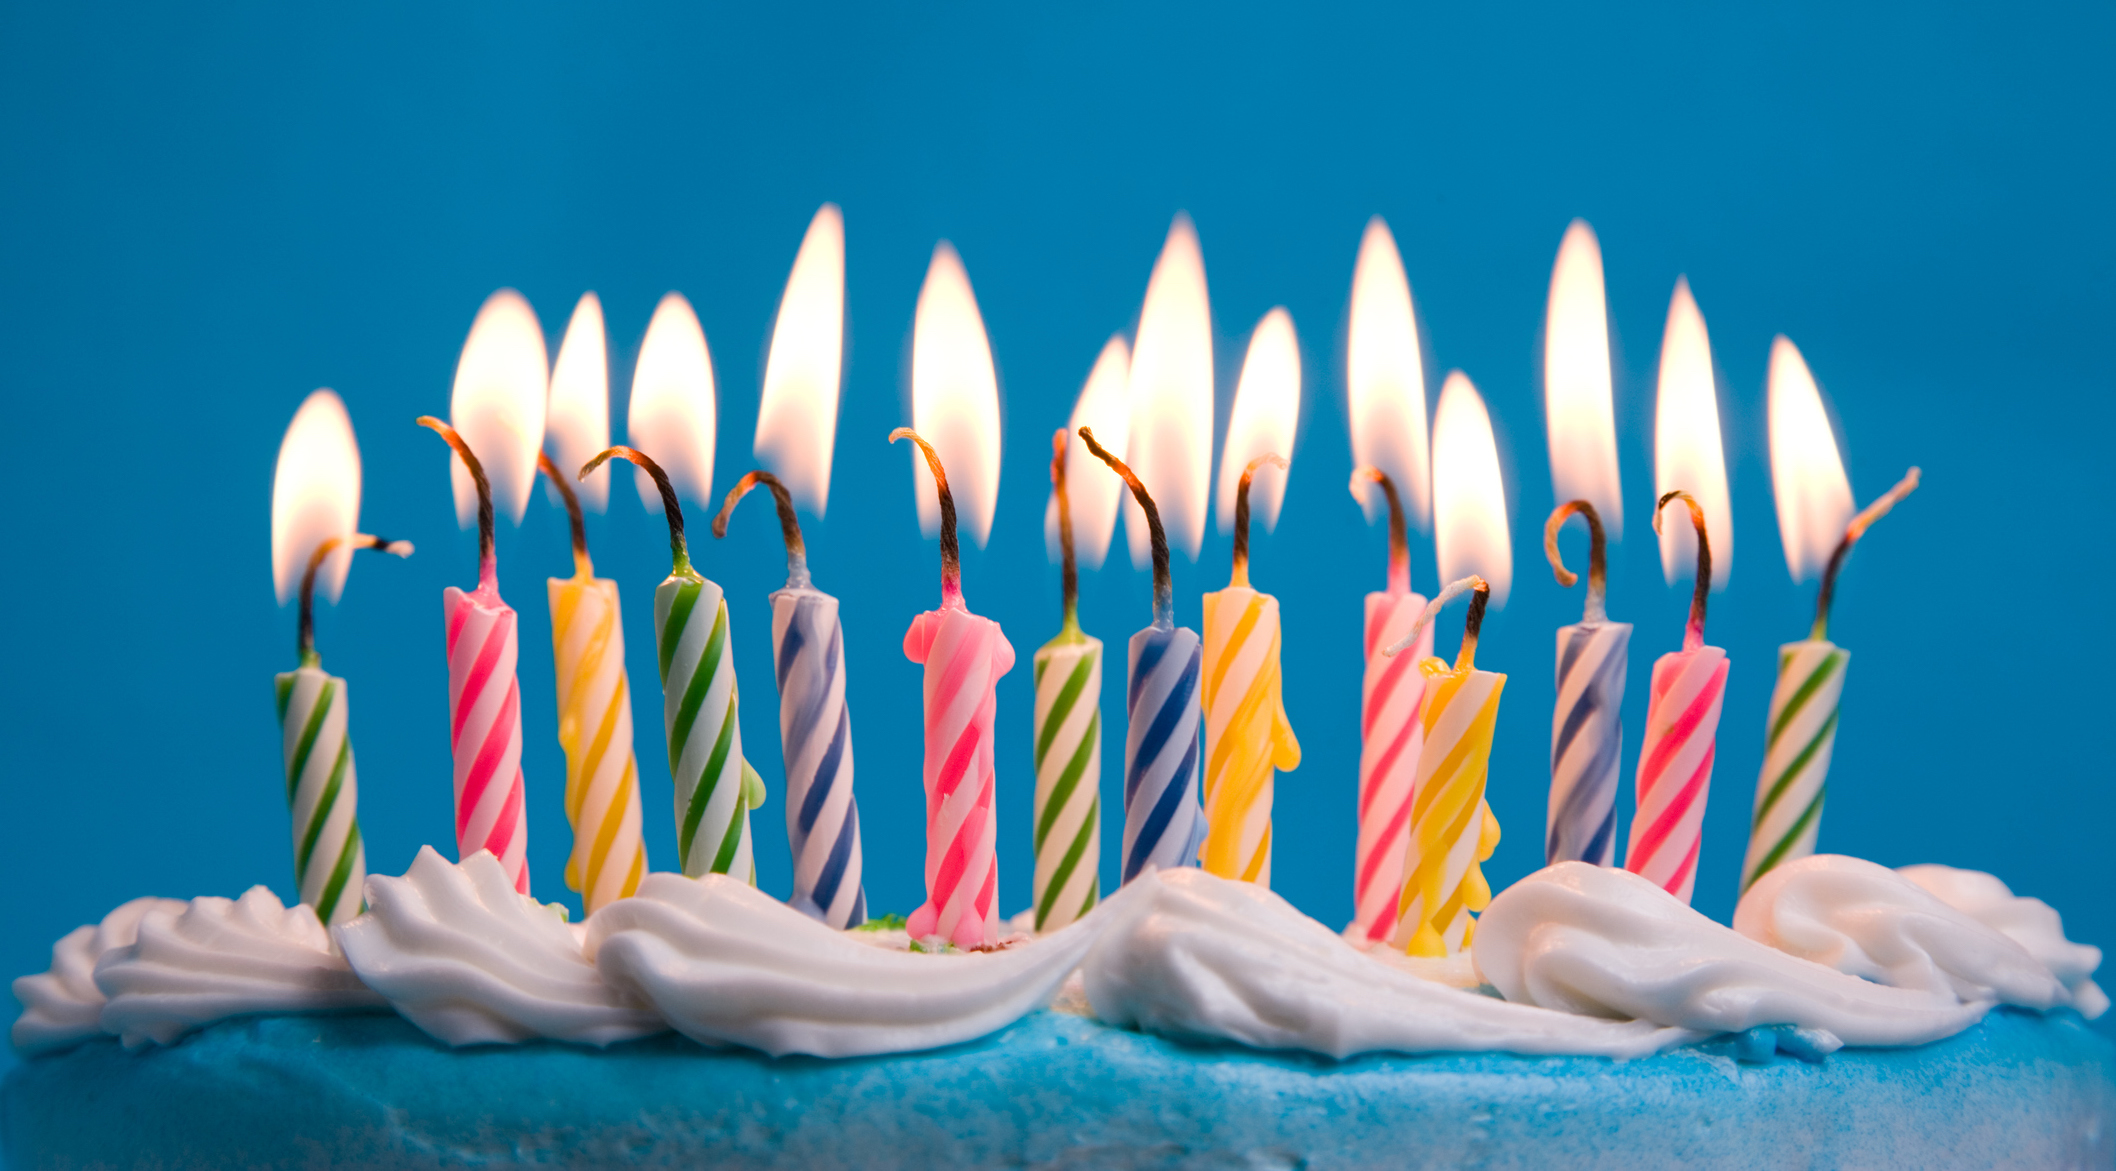 Is COVID19 causing us to rethink blowing out candles on a birthday cake?